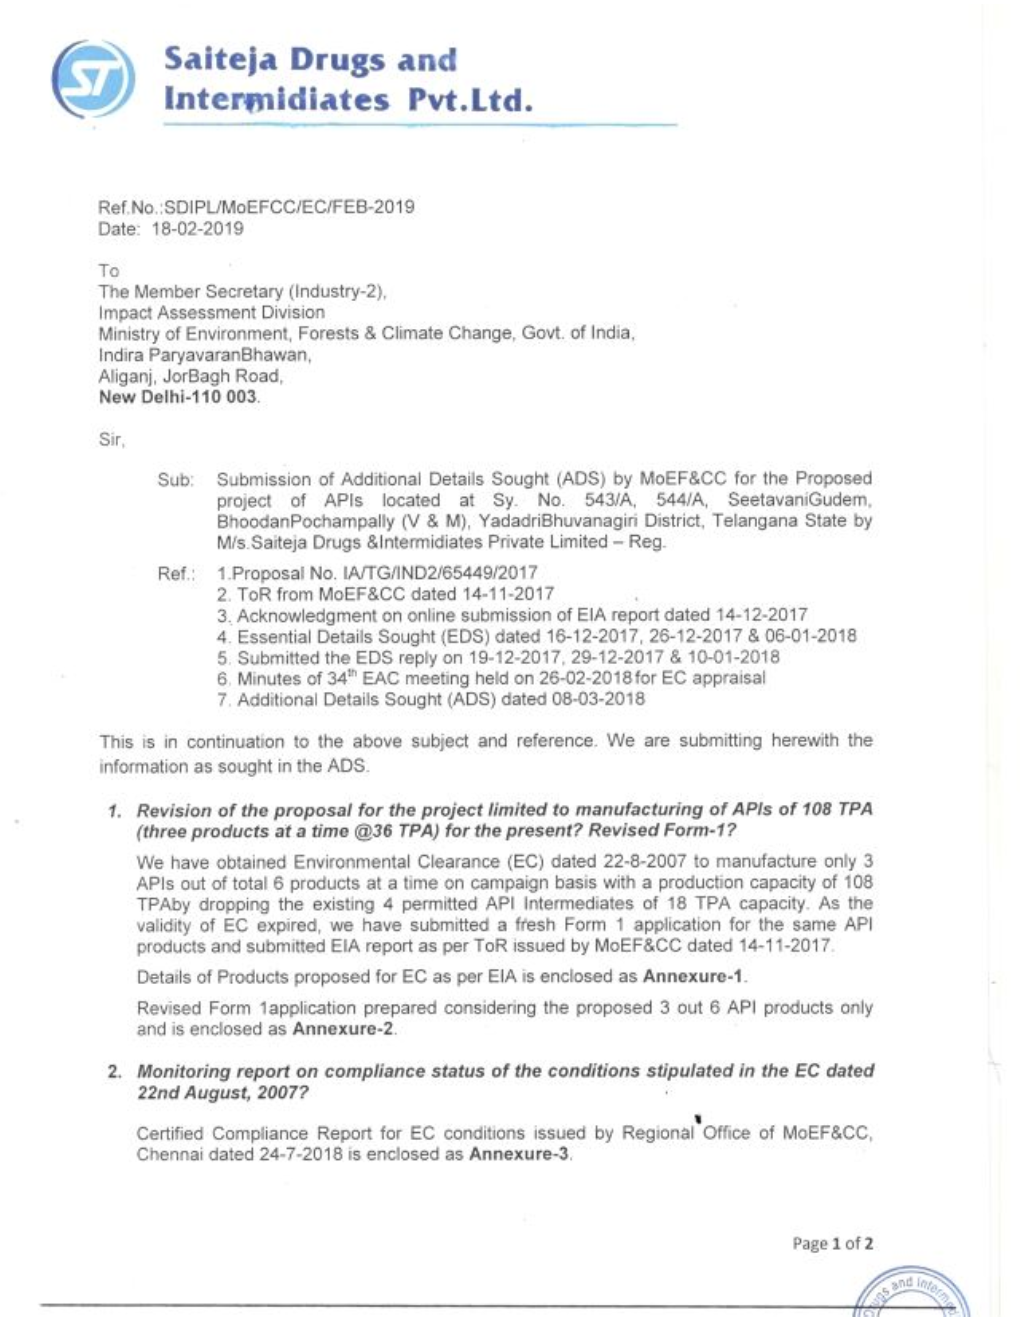 Annexure 1 Details of Products Proposed for EC As Per Submitted EIA Annexure - 1